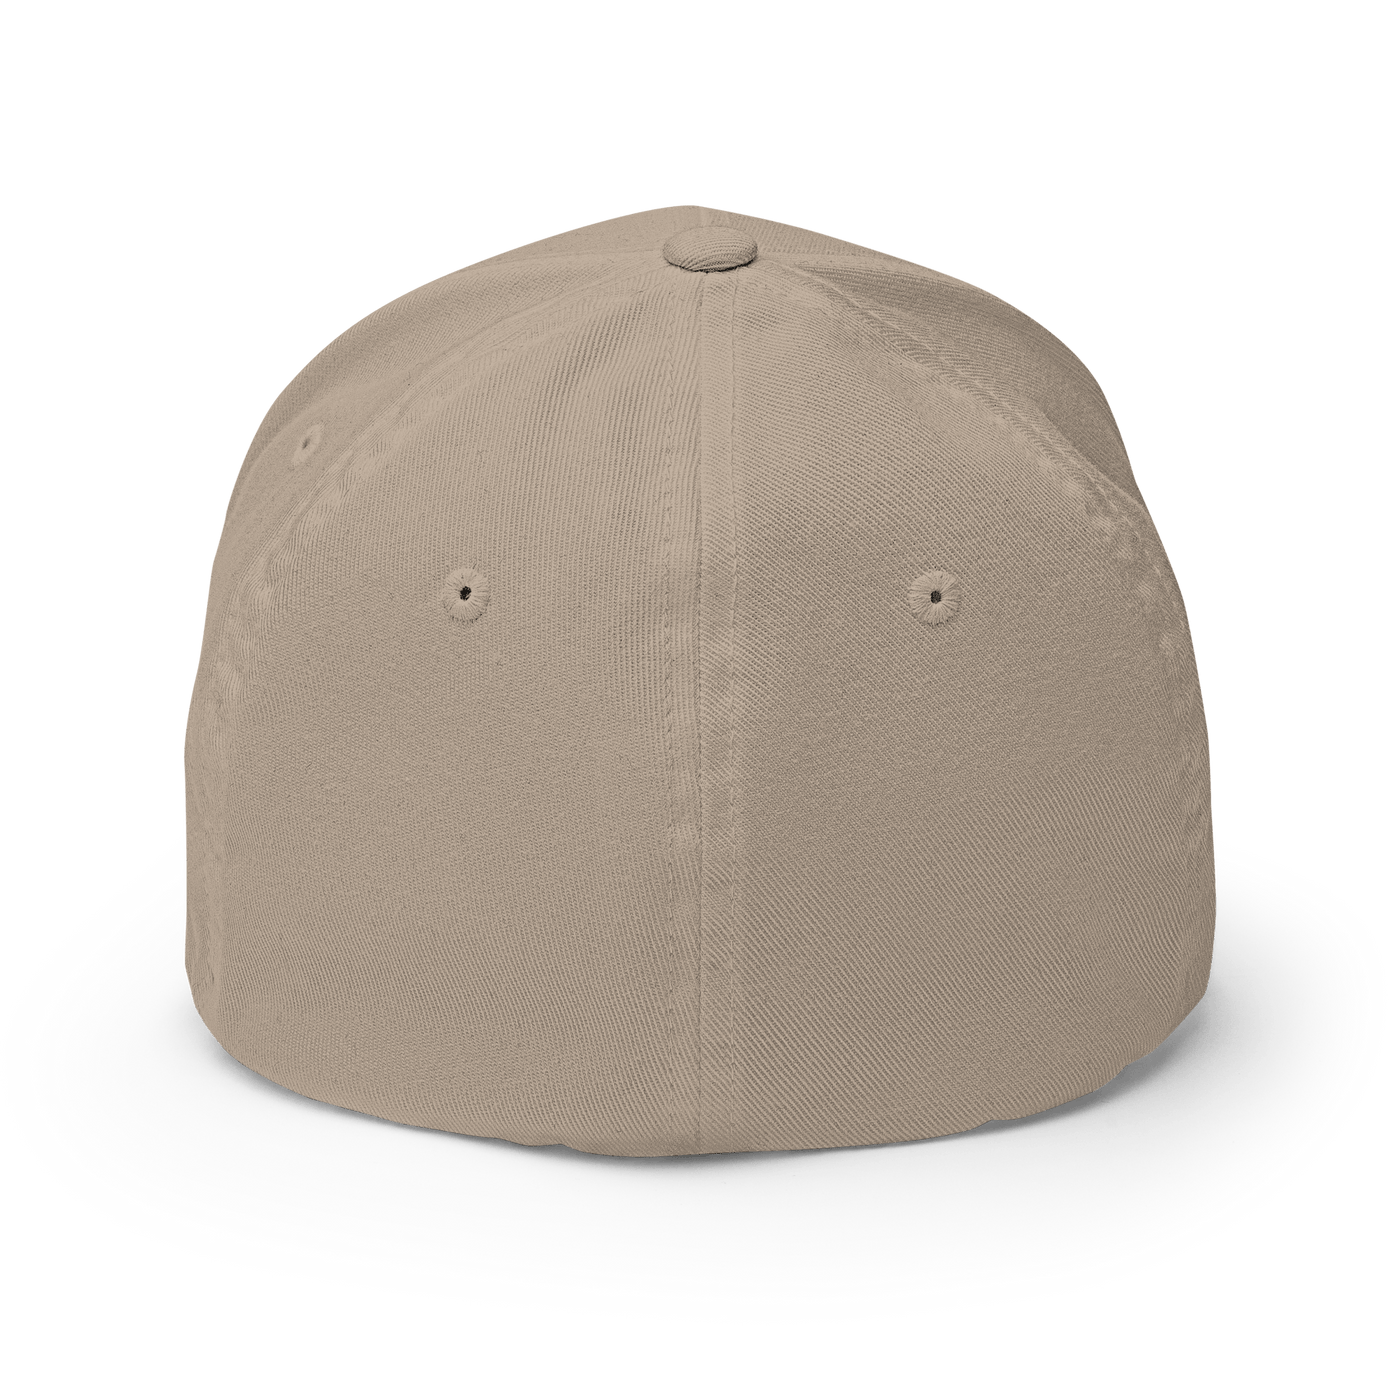 Thinking Flexfit Cap - Olive - S/M - Just Another Cap Store